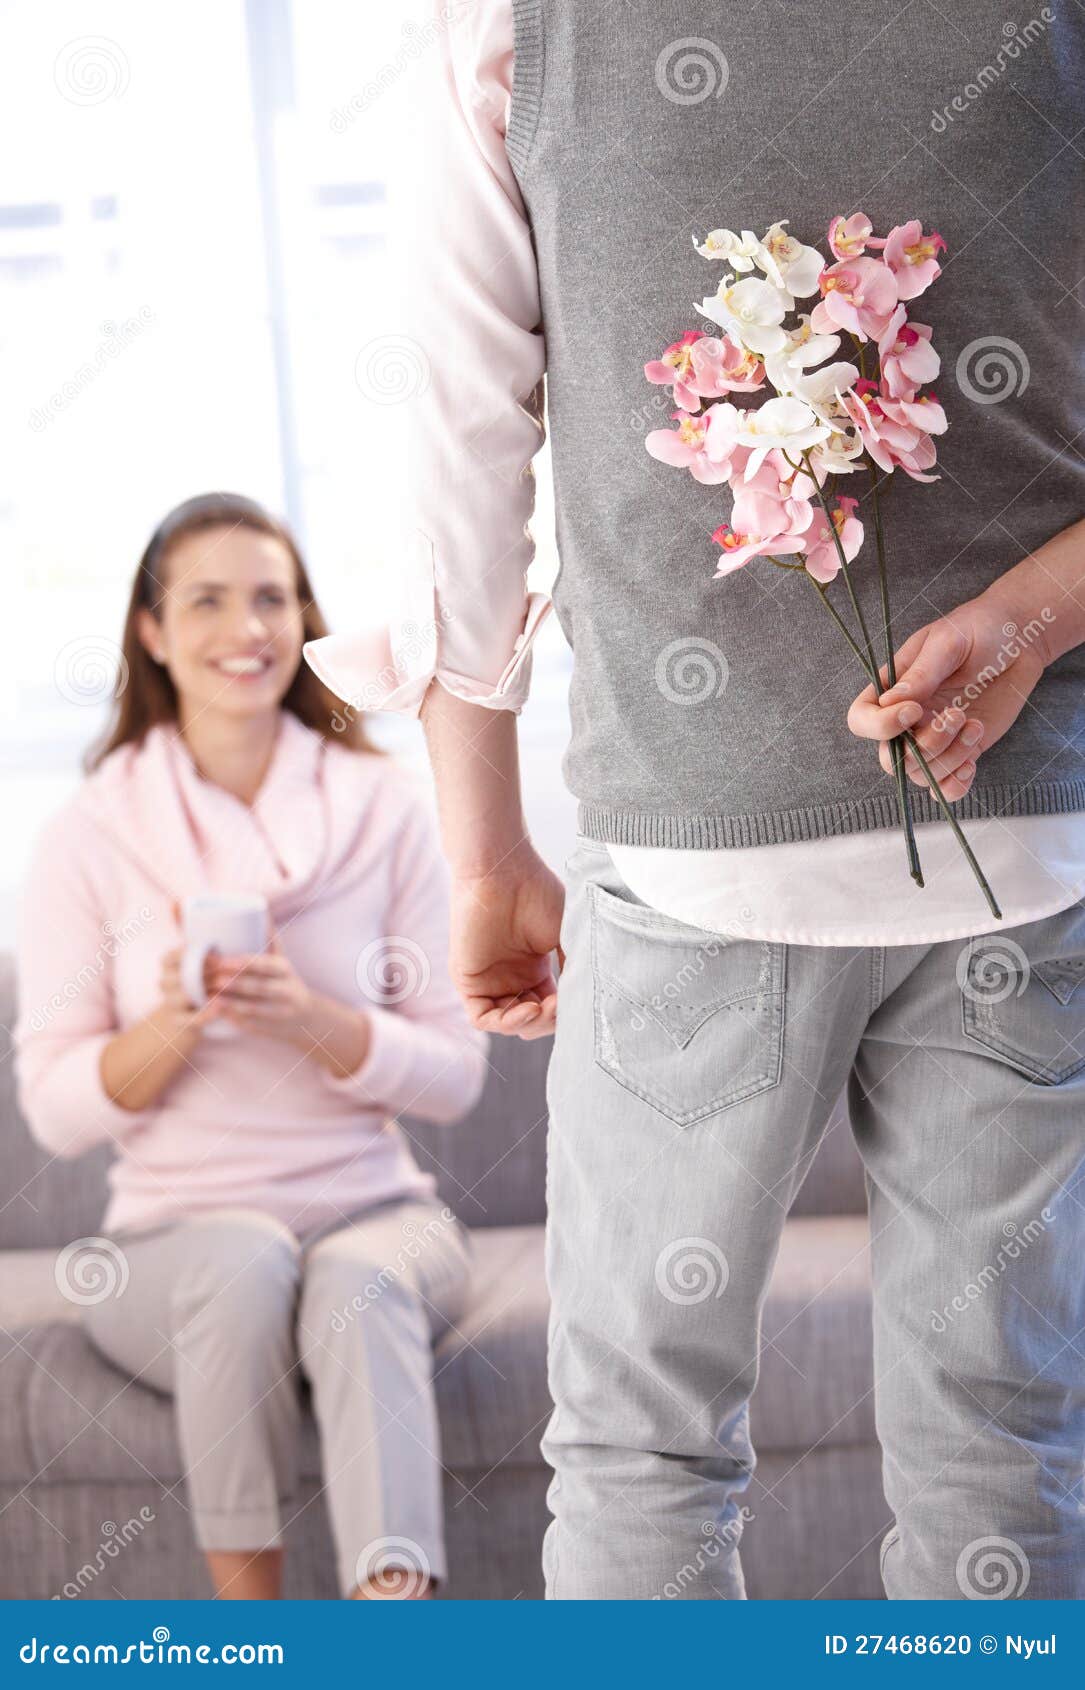 young man bringing flowers to woman